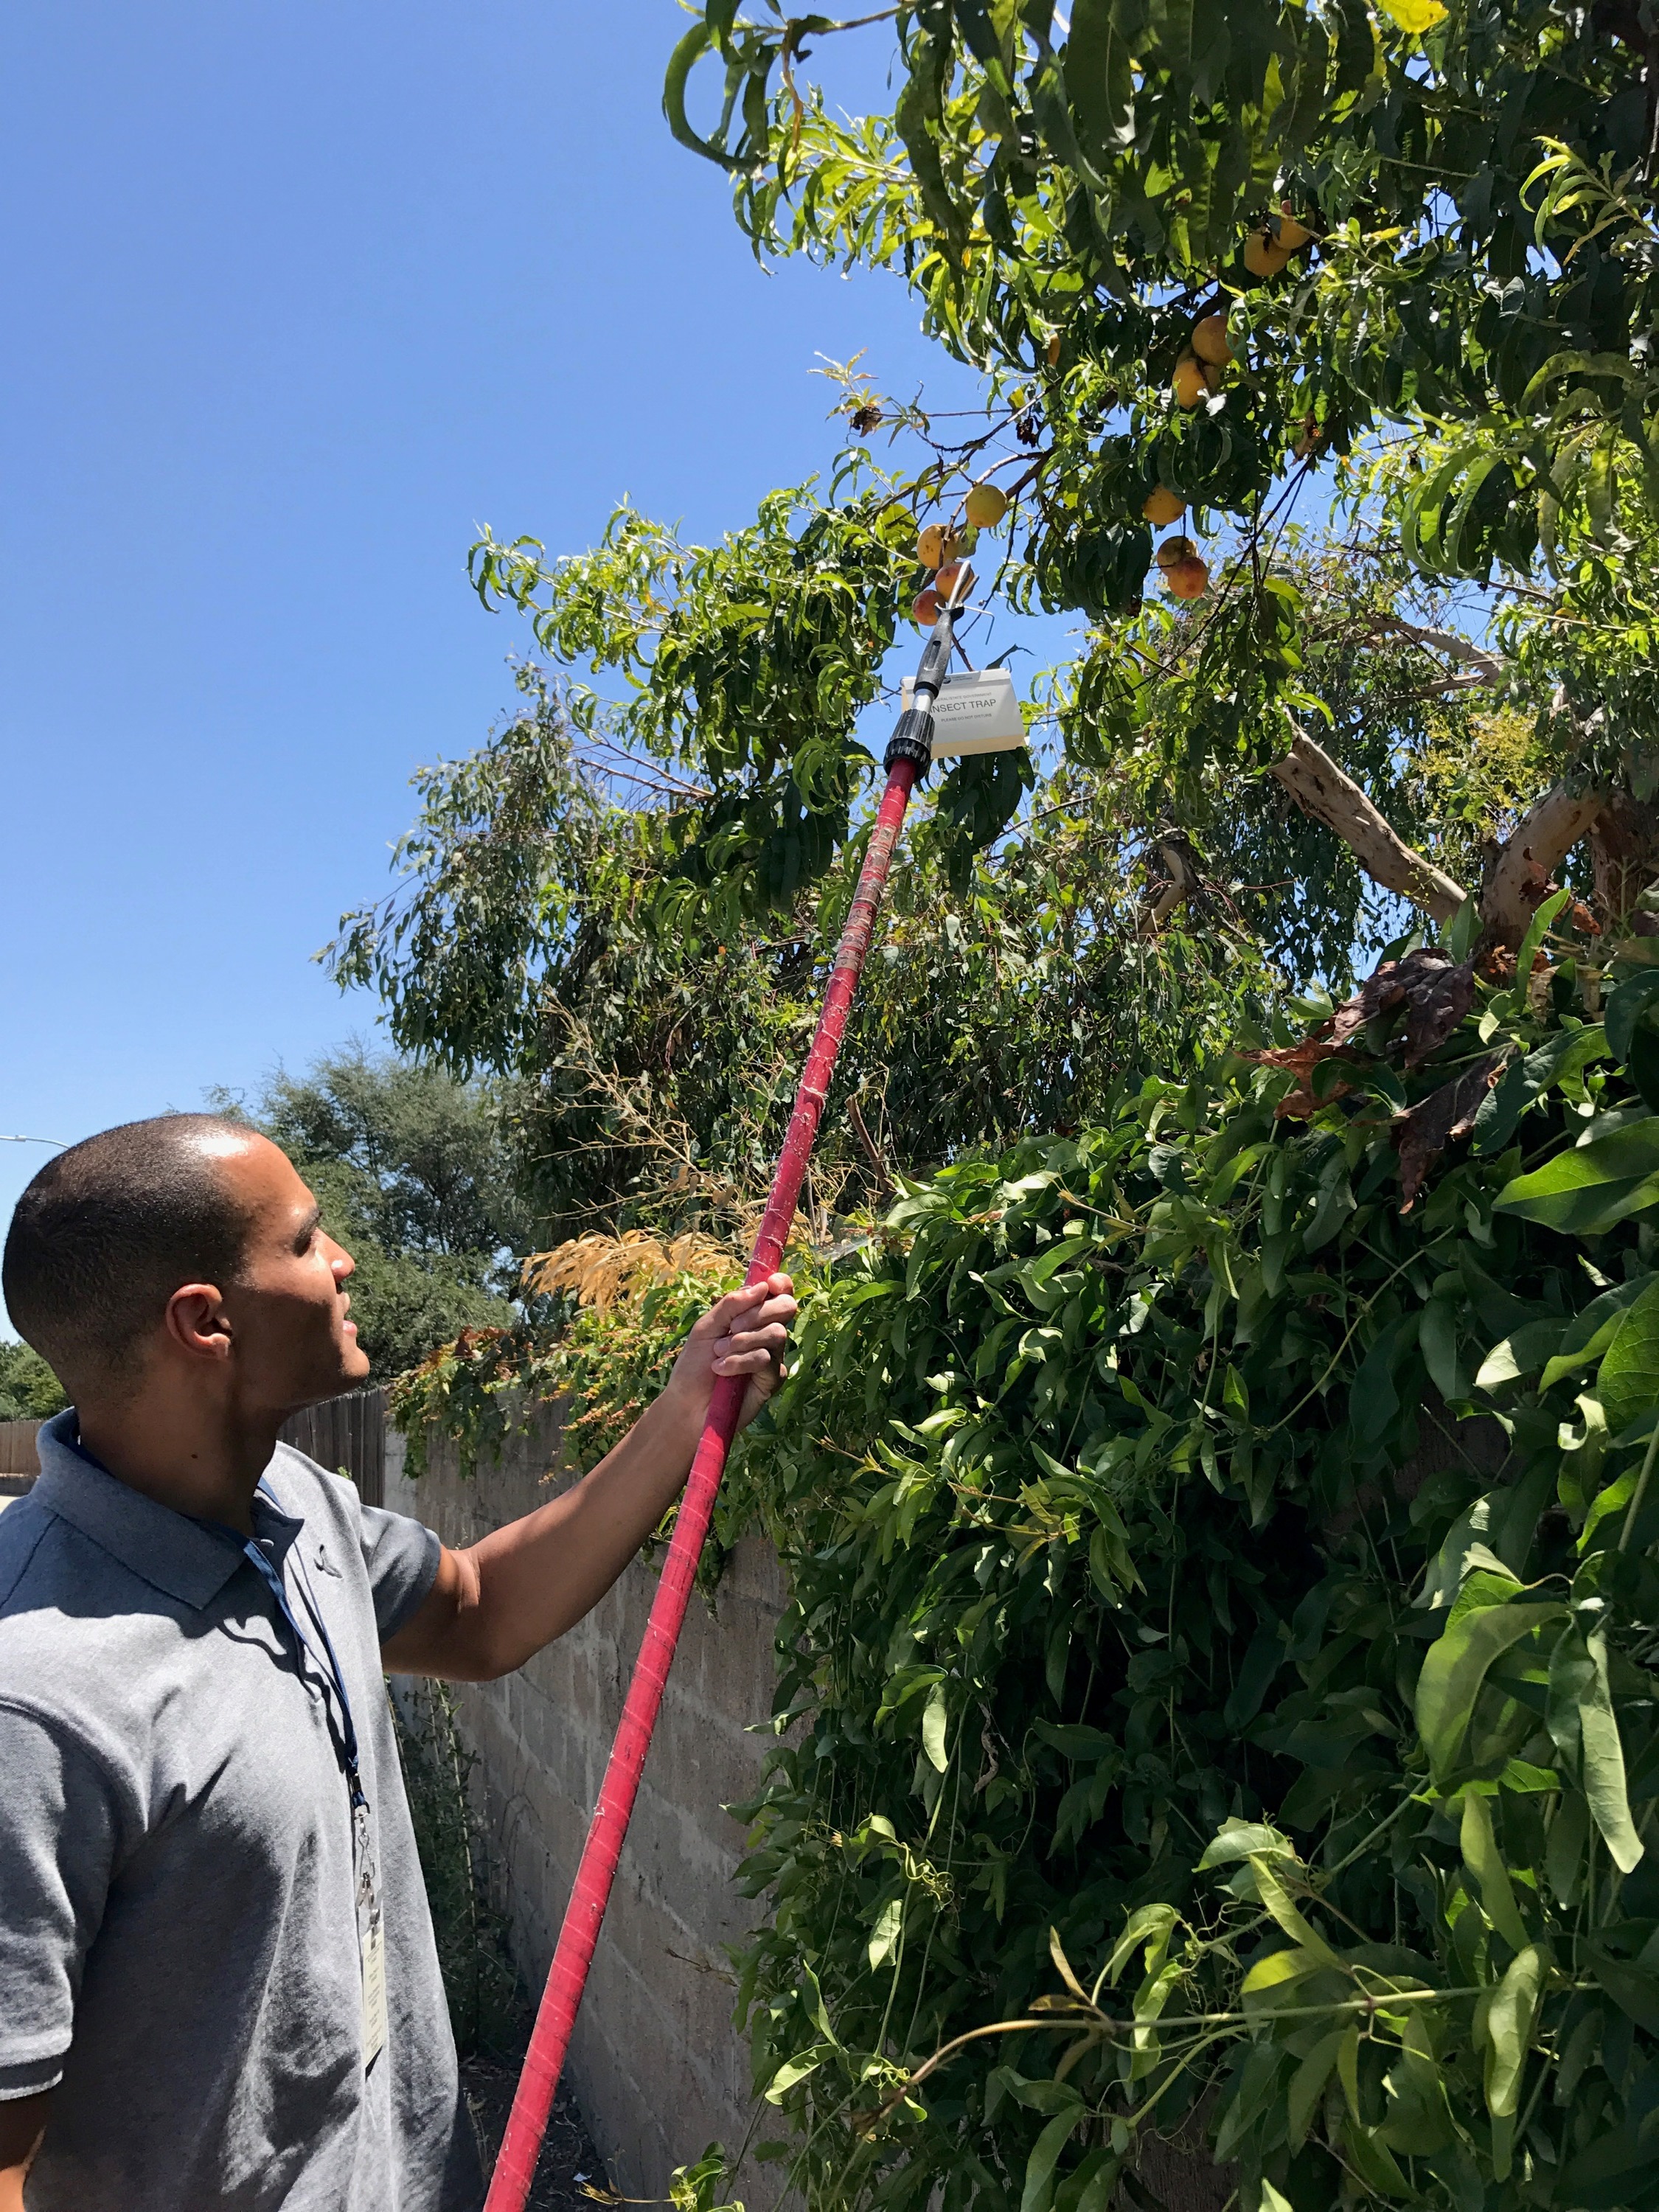 Man checking for Pests in fruit trees